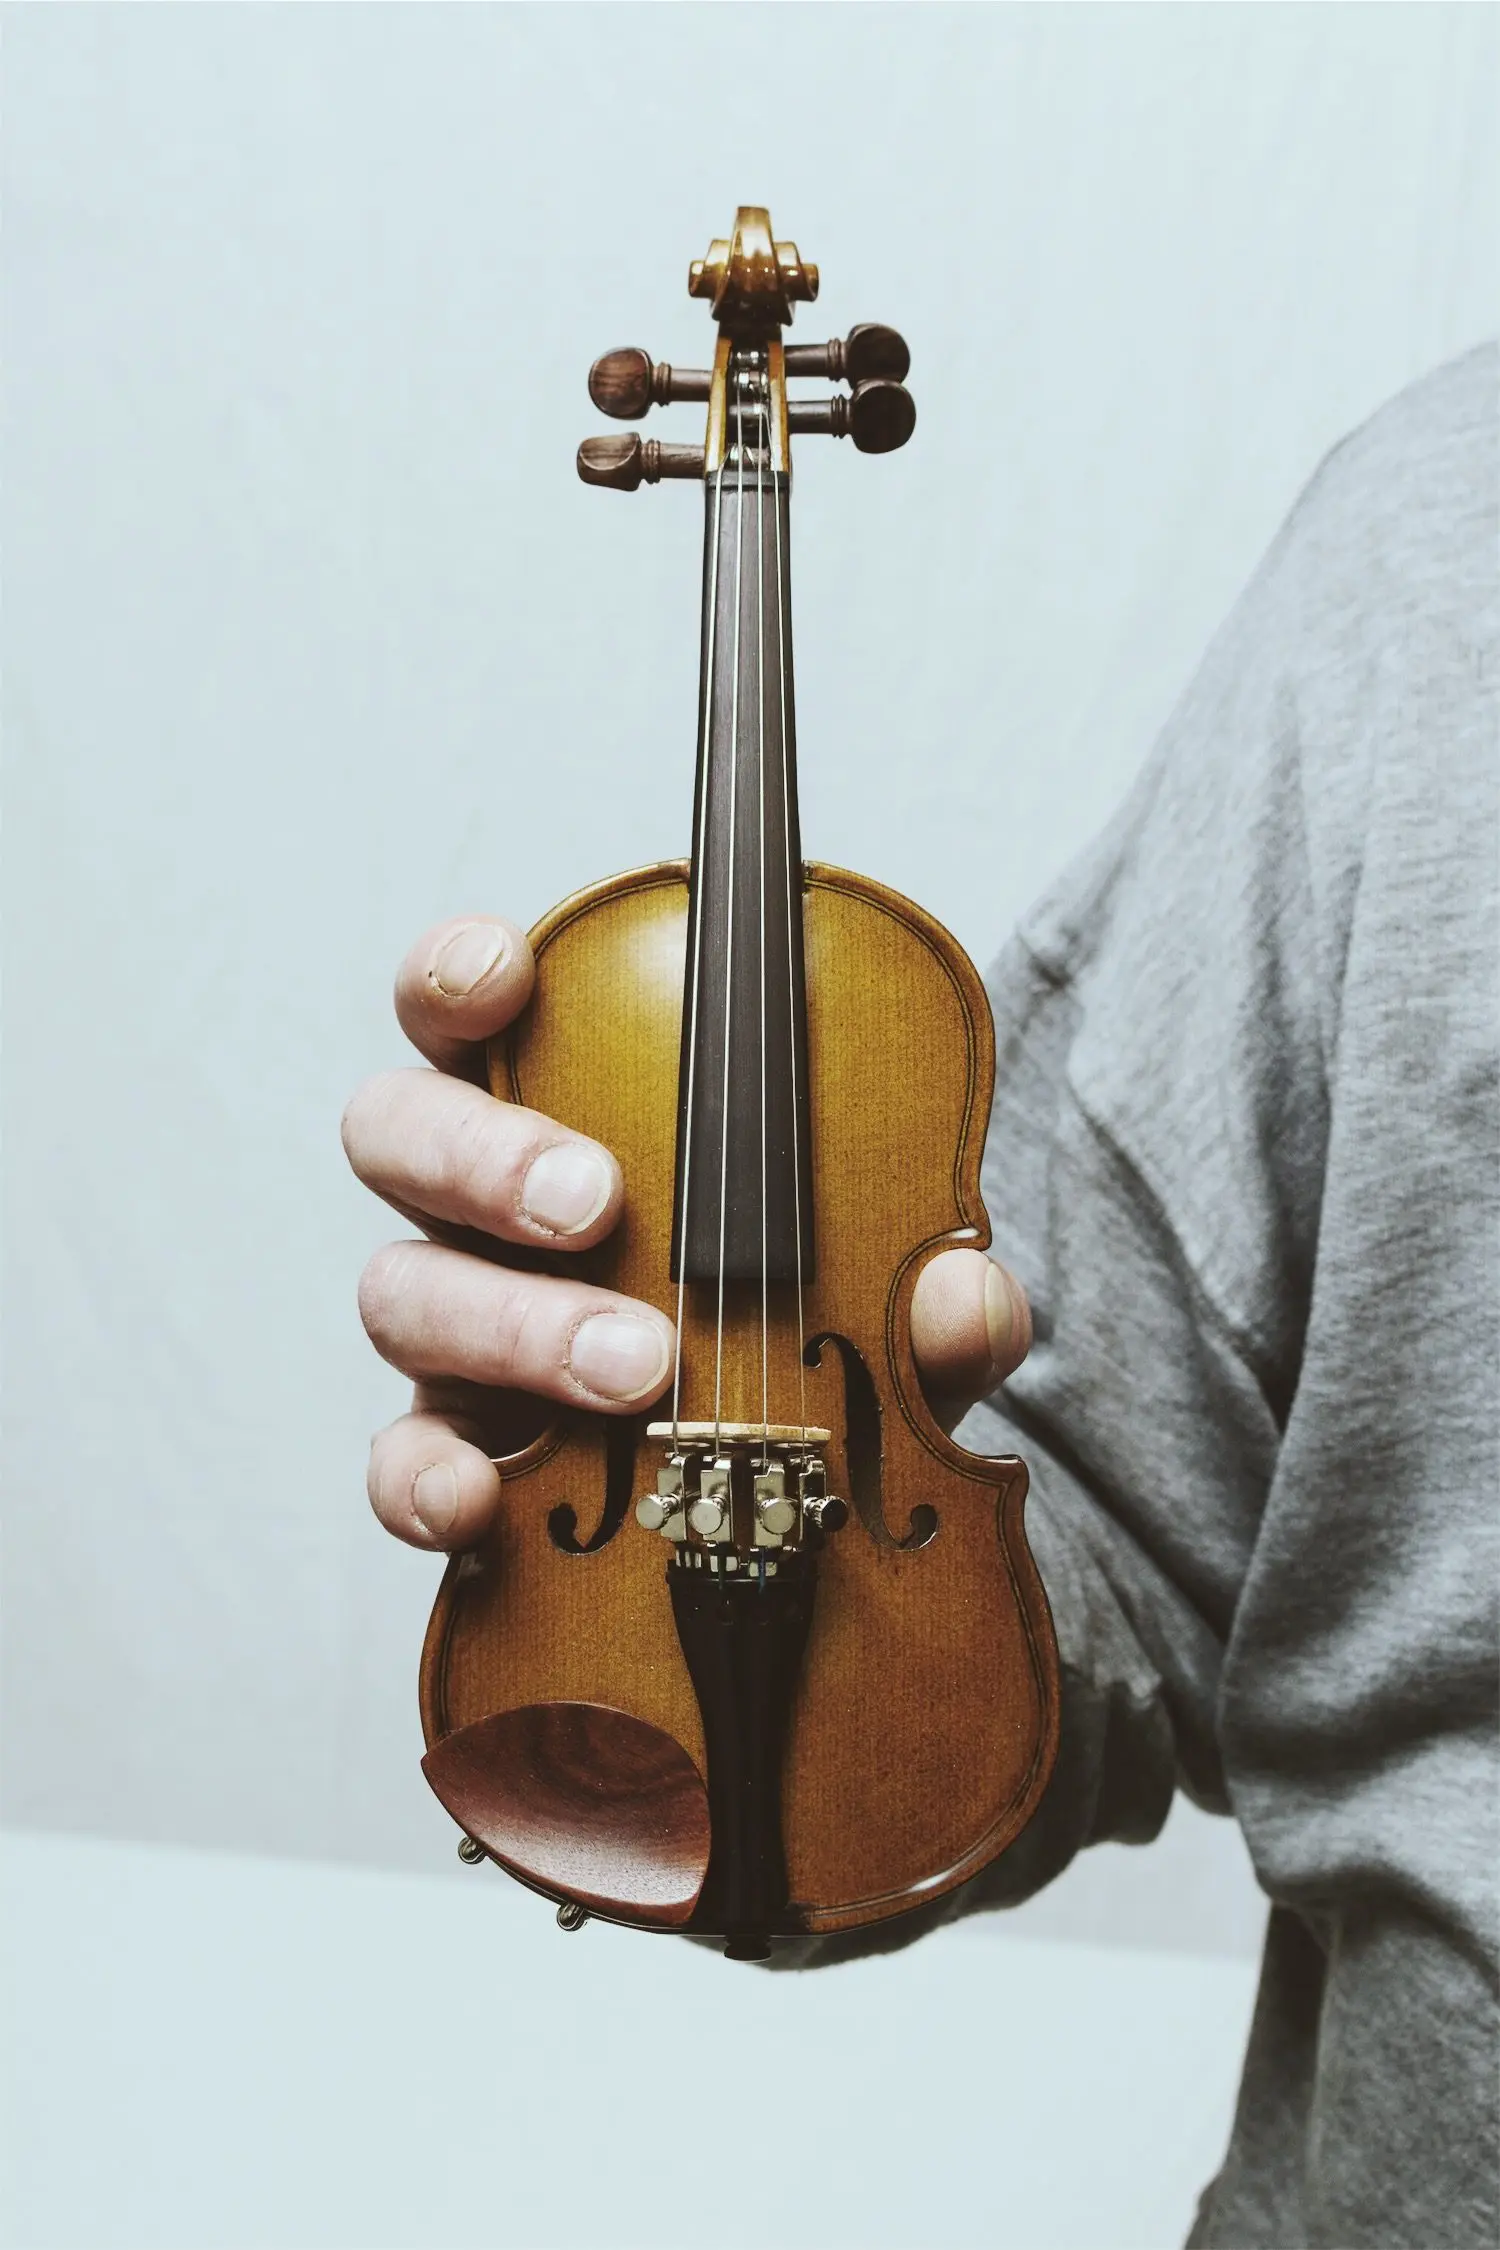 how long is the world's smallest violin - What is the world record for smallest violin